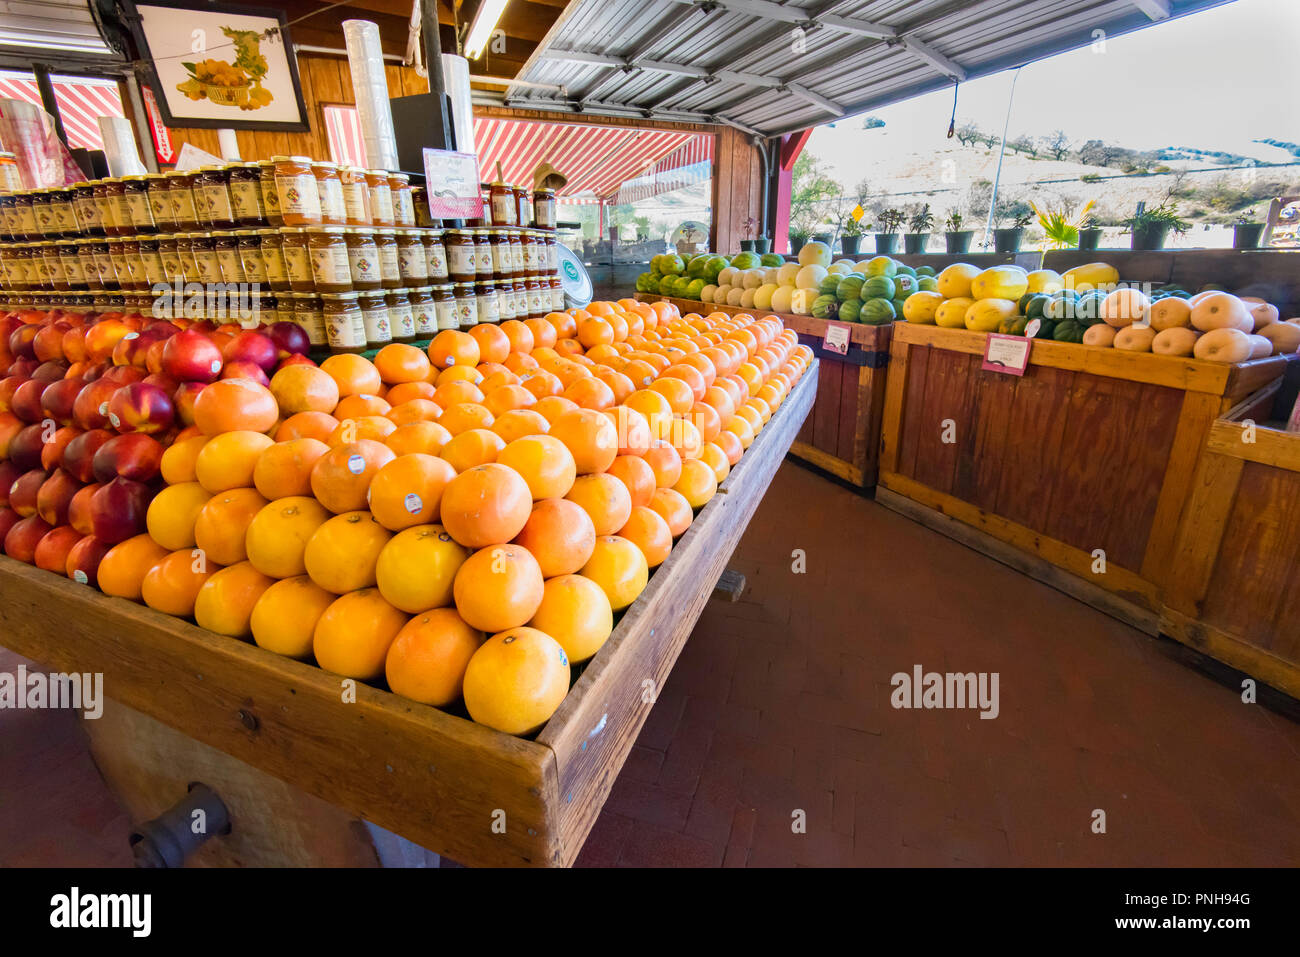 Fruit and vegetables stacked for sale at the Casa De Fruta roadside centre in the Pacheco Valley of Northern California, along State Route 152, CA USA Stock Photo